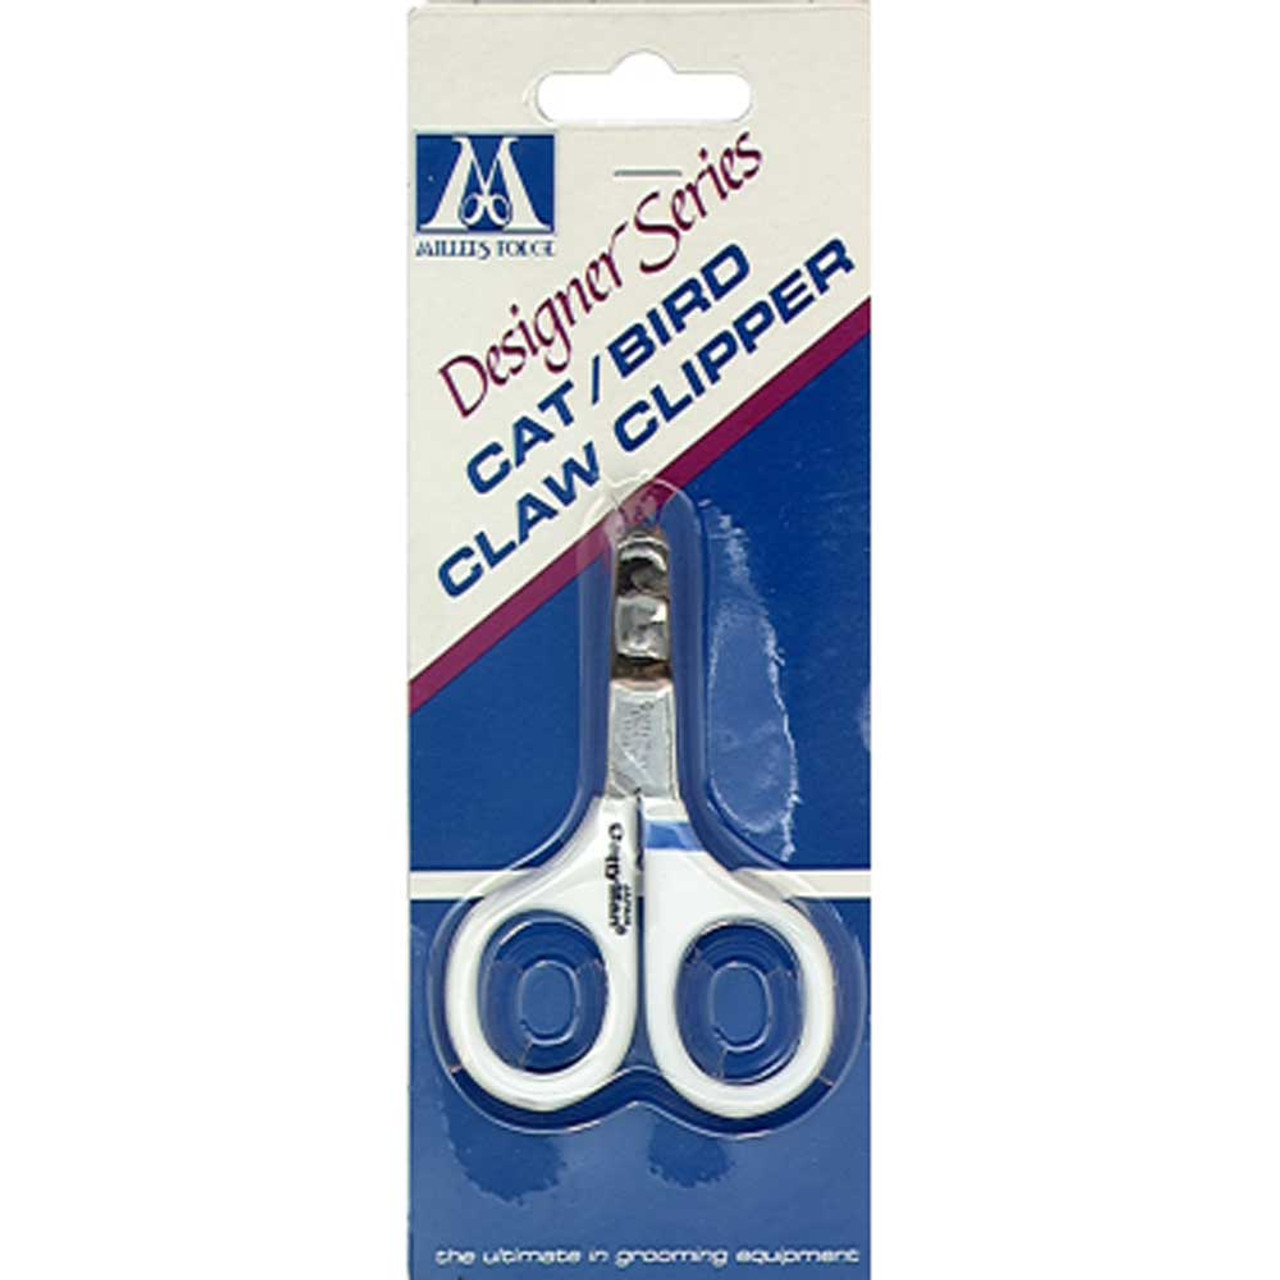 Otto Herder Large Nail Clippers, Stainless Steel, made in Germany - Mont  bleu Store